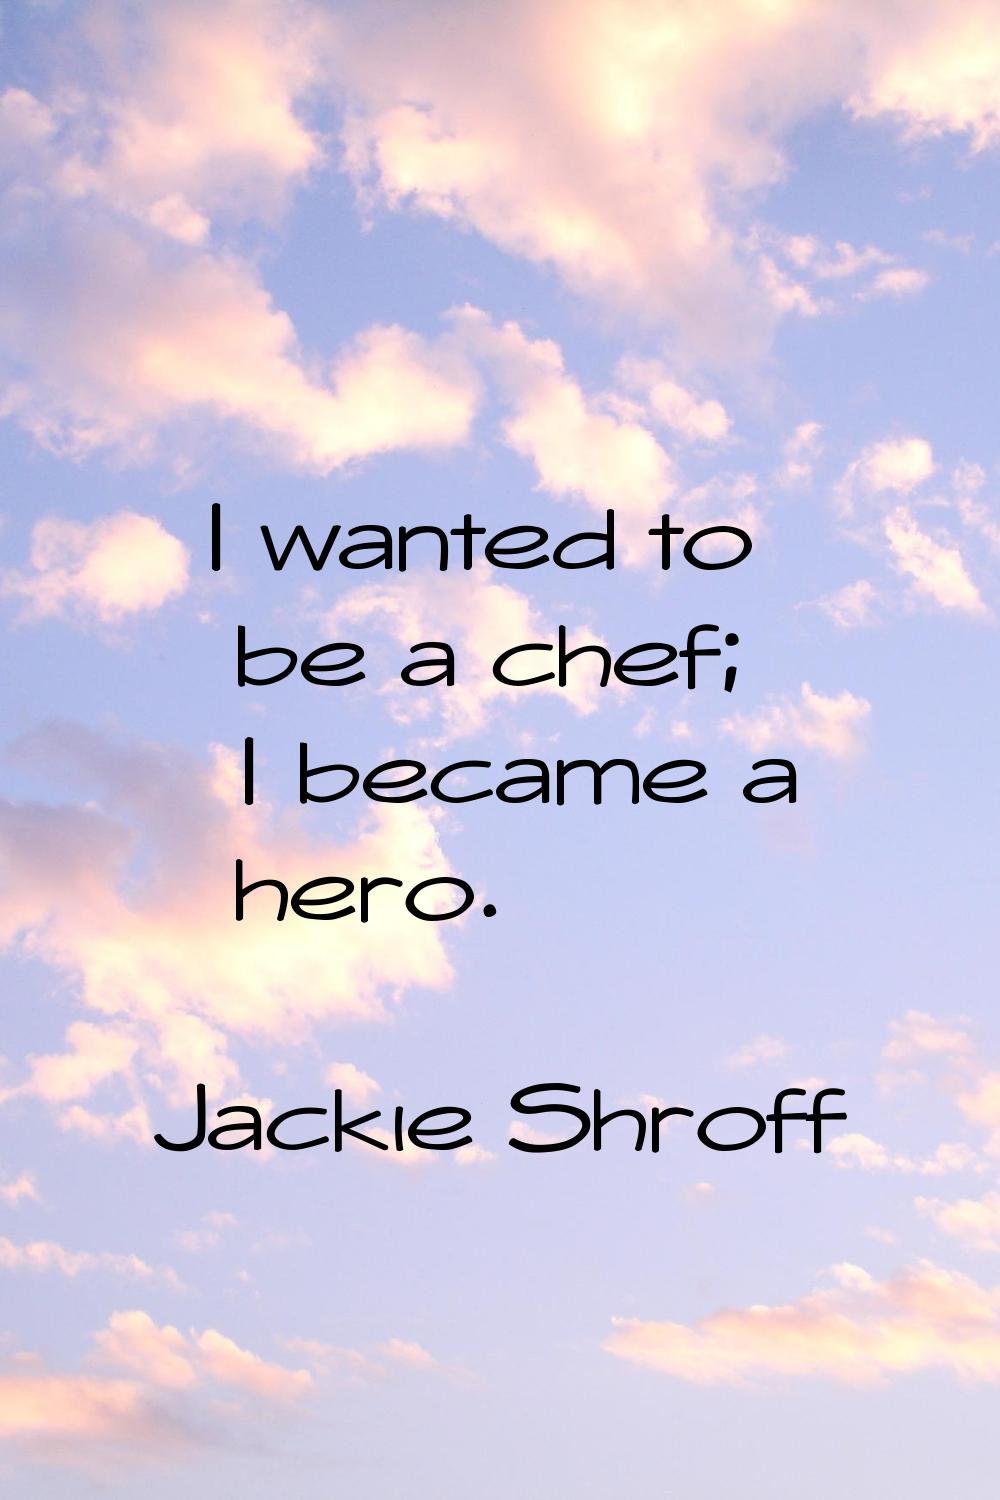 I wanted to be a chef; I became a hero.